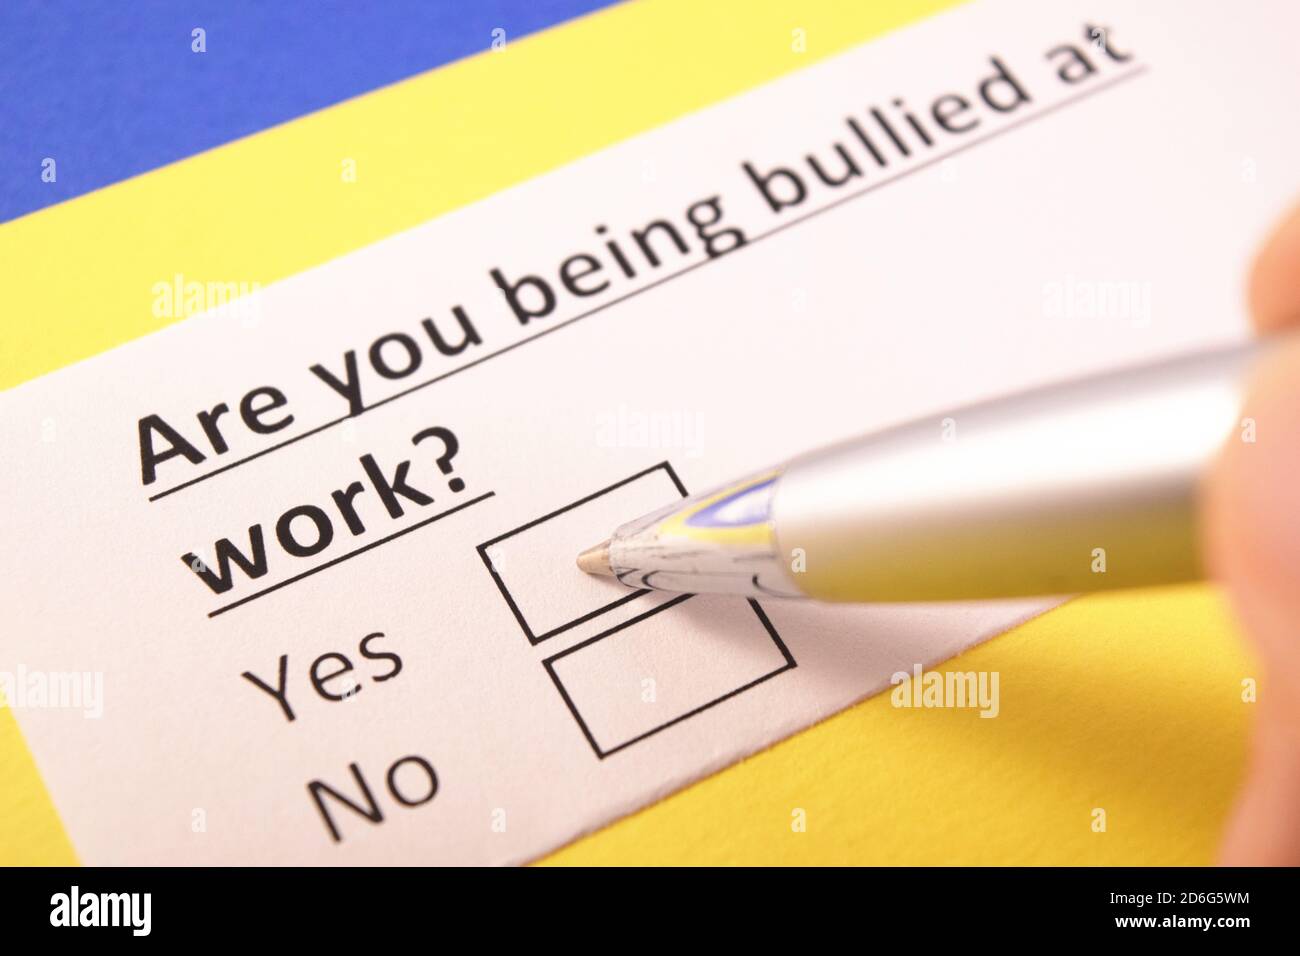 Are you being bullied at work? Yes or no? Stock Photo